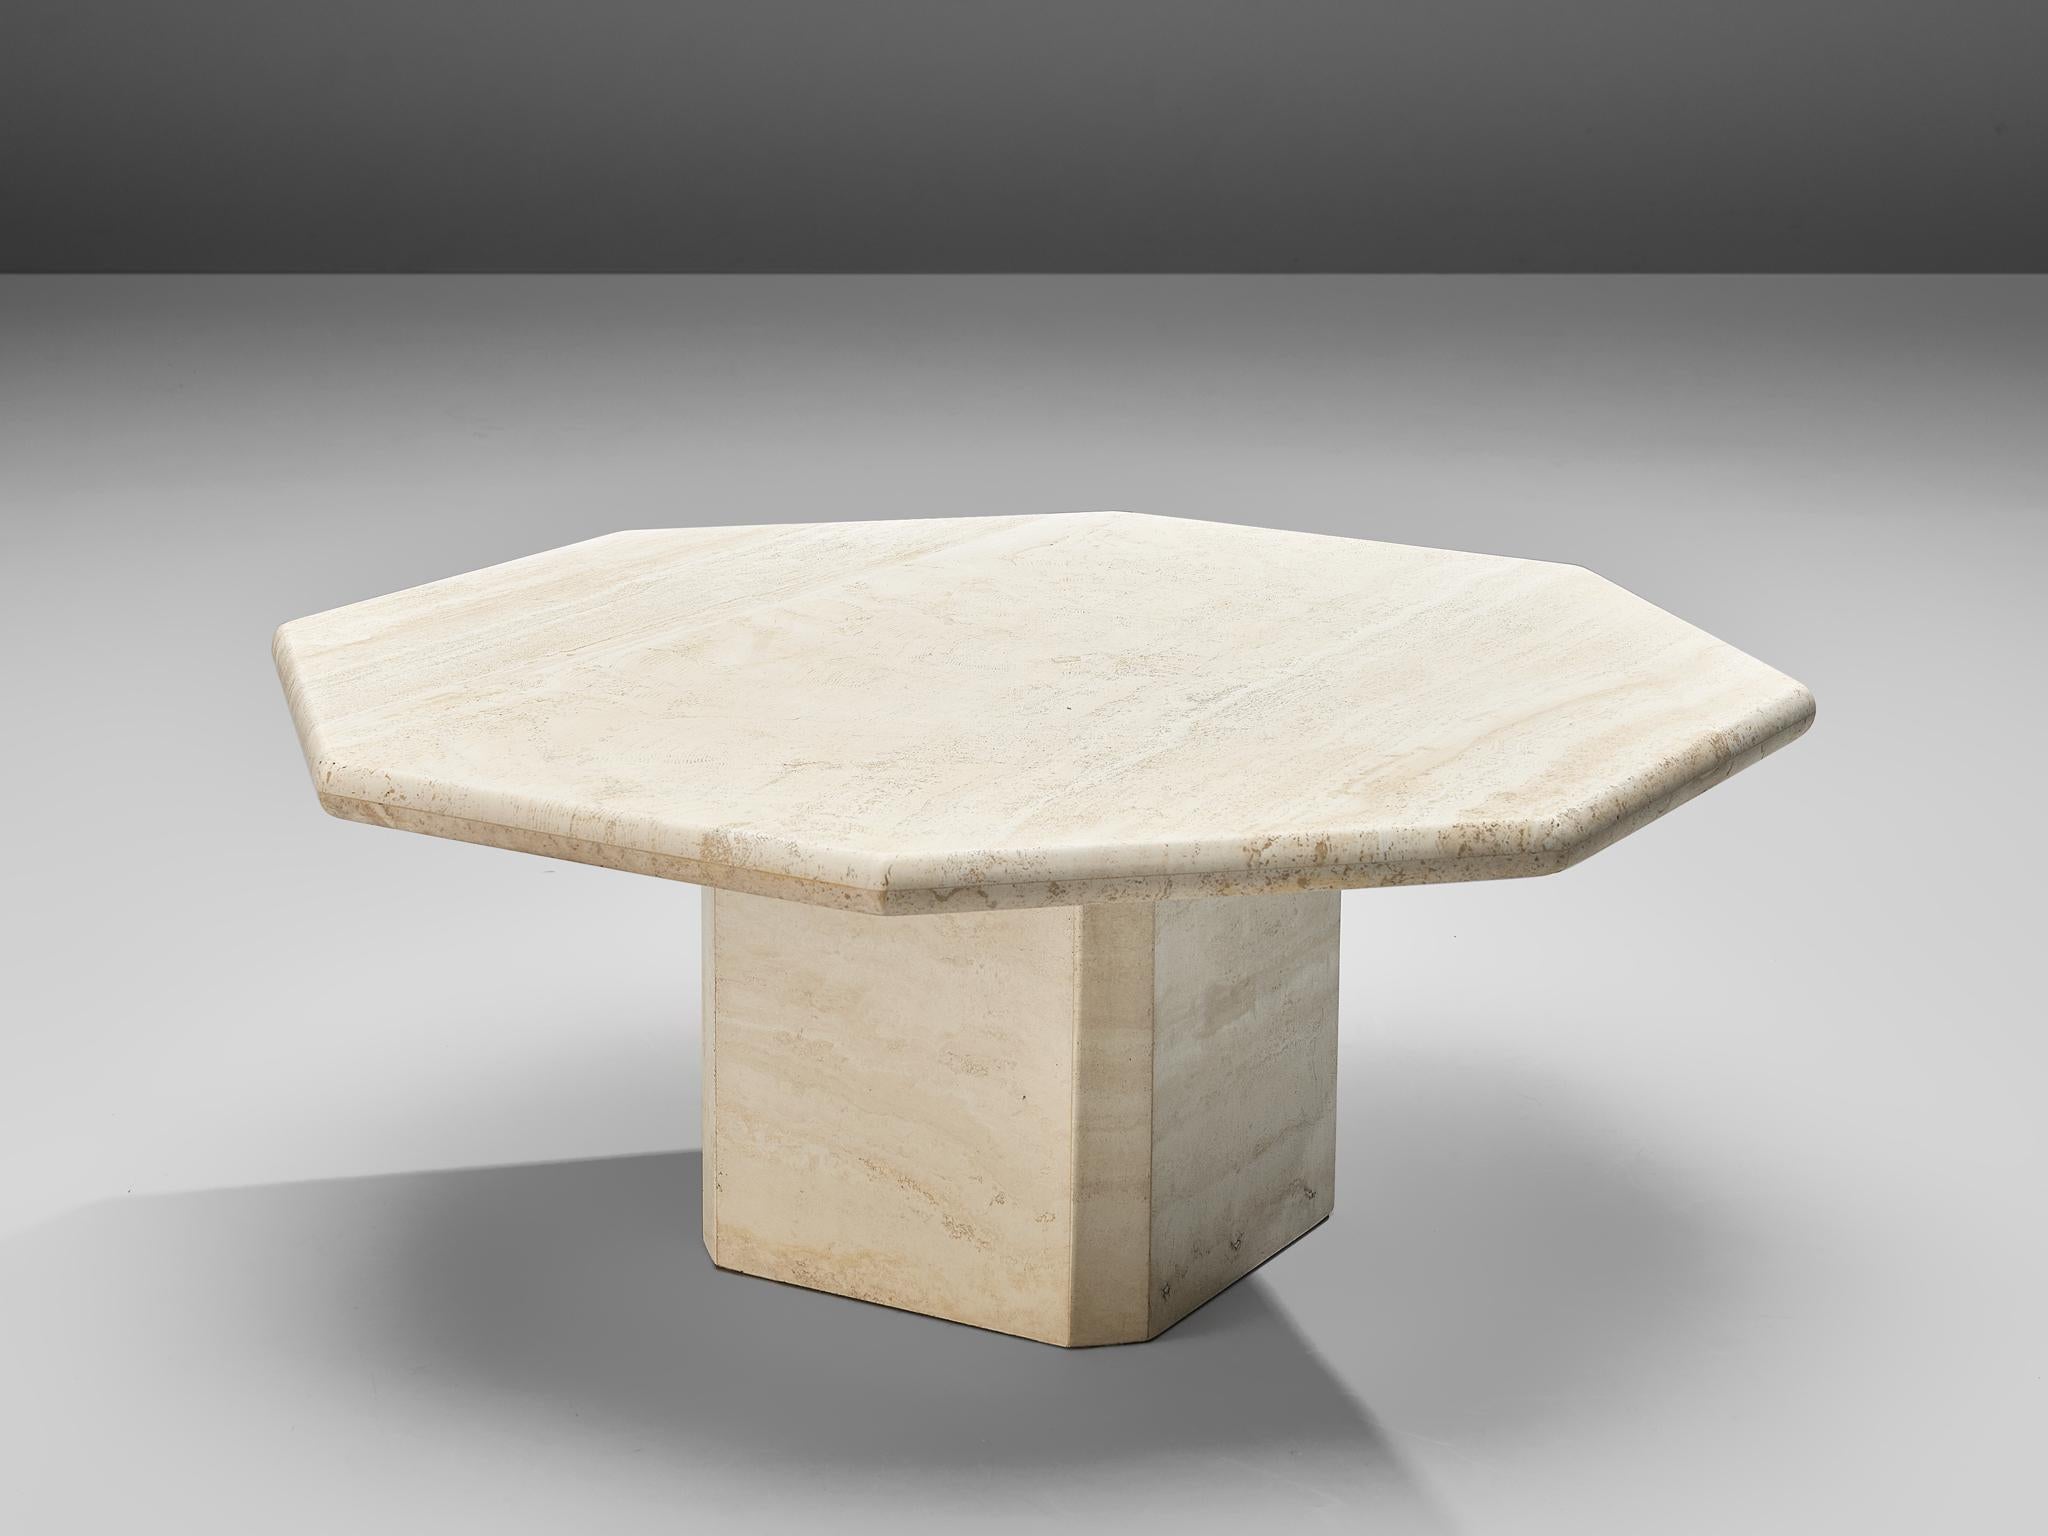 Coffee table, travertine, Europe, 1970s

This solid coffee table features an octogonal base and a thick polygonal tabletop. The bright travertine gives the table a sculptural look. The natural layers of the limestone structure the surface